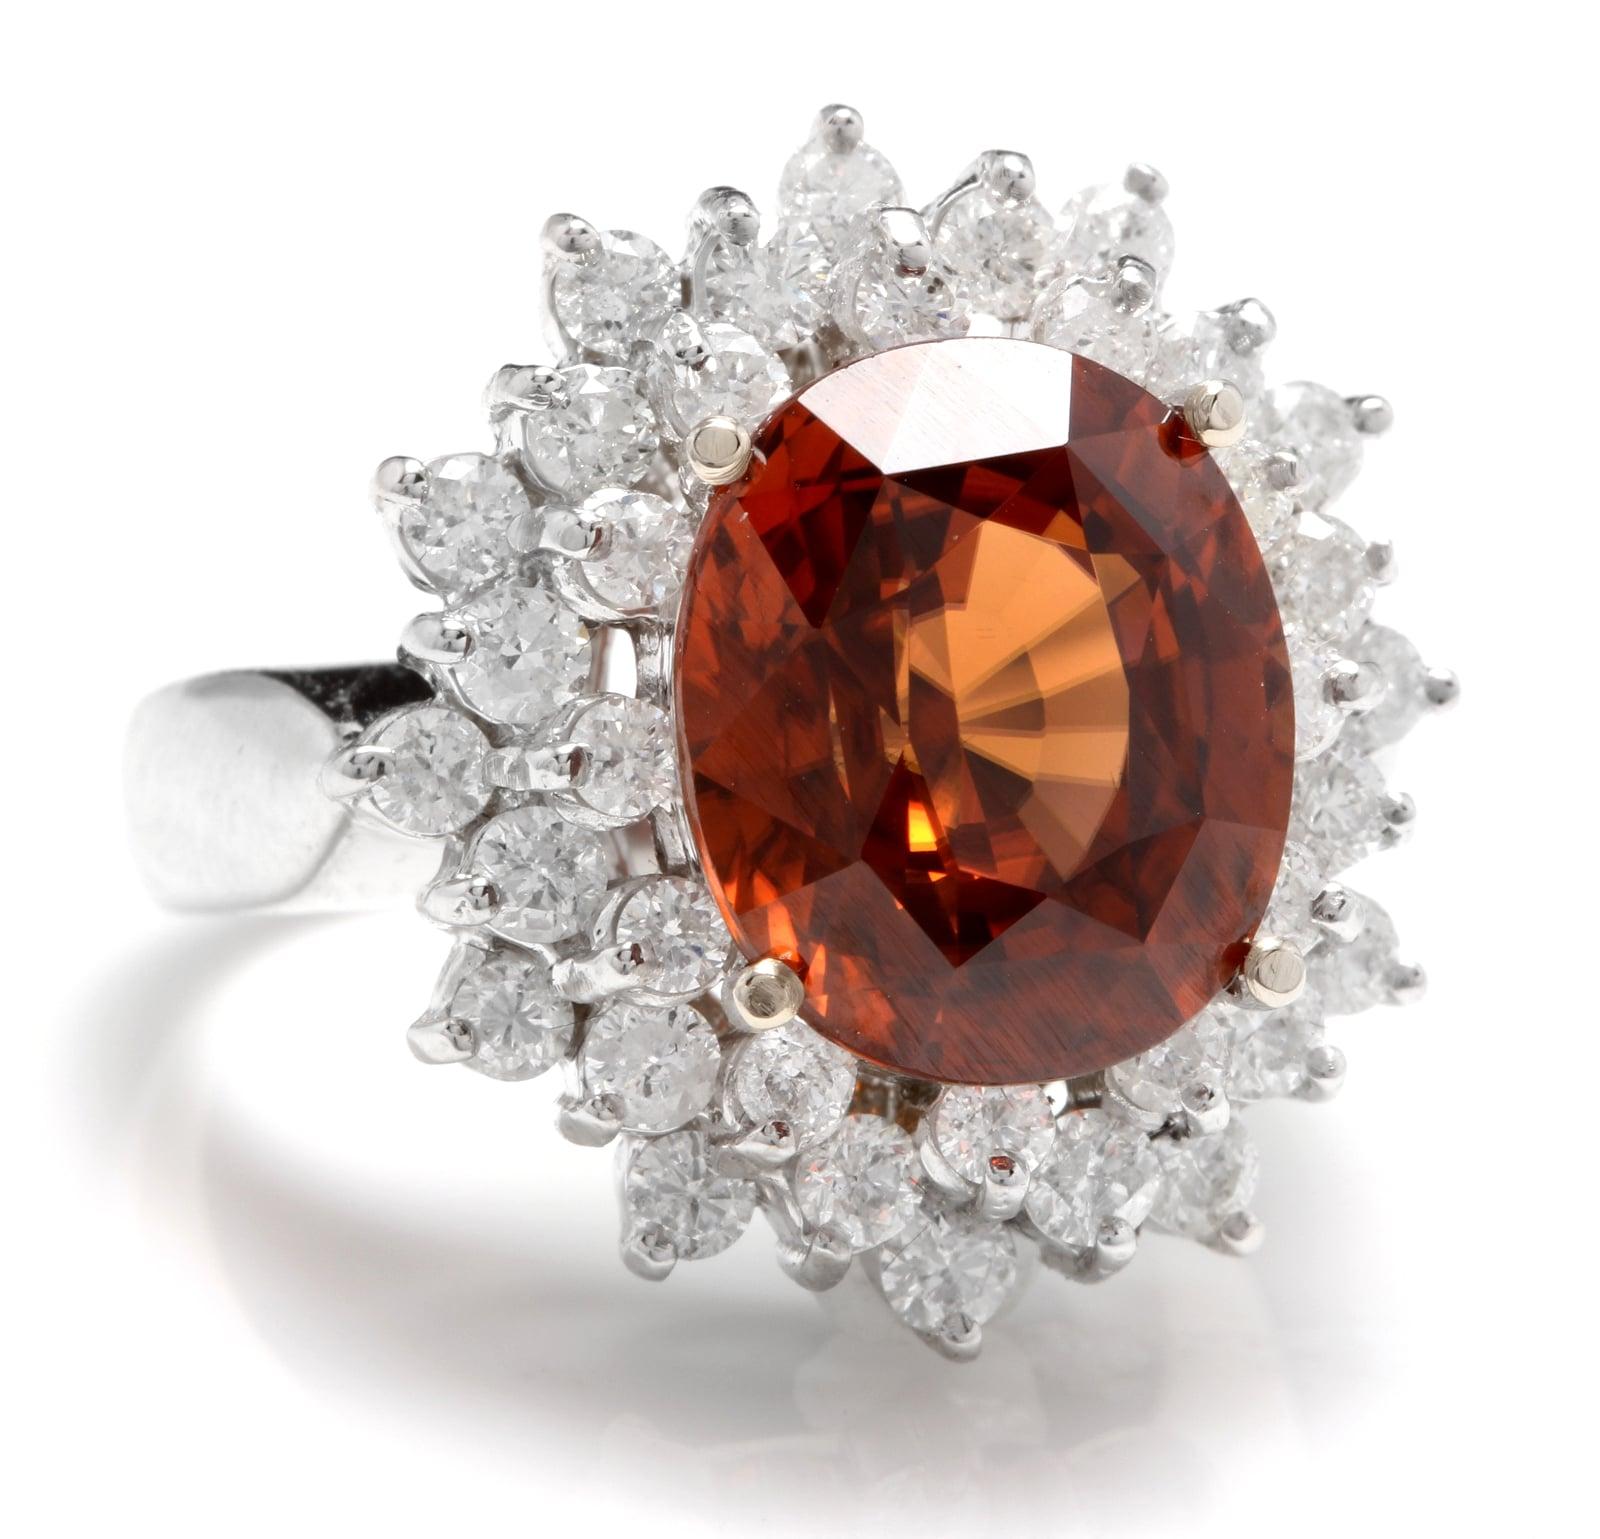 10.50 Carats Natural Very Nice Looking Orange Zircon and Diamond 14K Solid White Gold Ring

Suggested Replacement Value: Approx. $8,900.00

Total Natural Oval Cut Zircon Weight is: Approx. 9.00 Carats 

Zircon Measures: Approx. 12.00 x